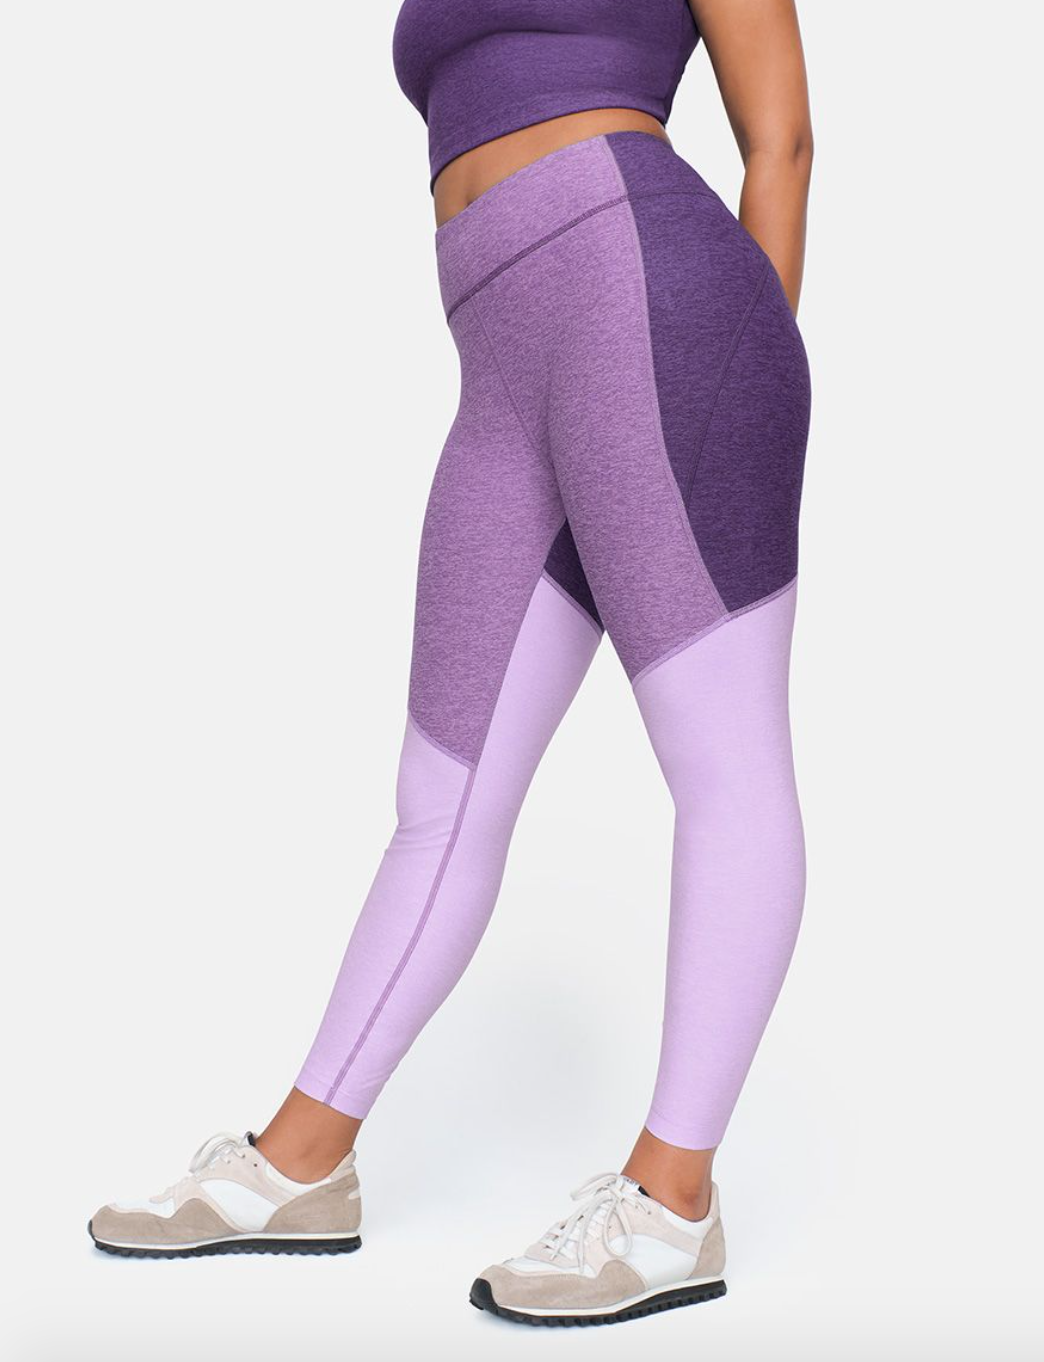 Outdoor Voices High Waist Textured Compression 7/8 Warmup Leggings